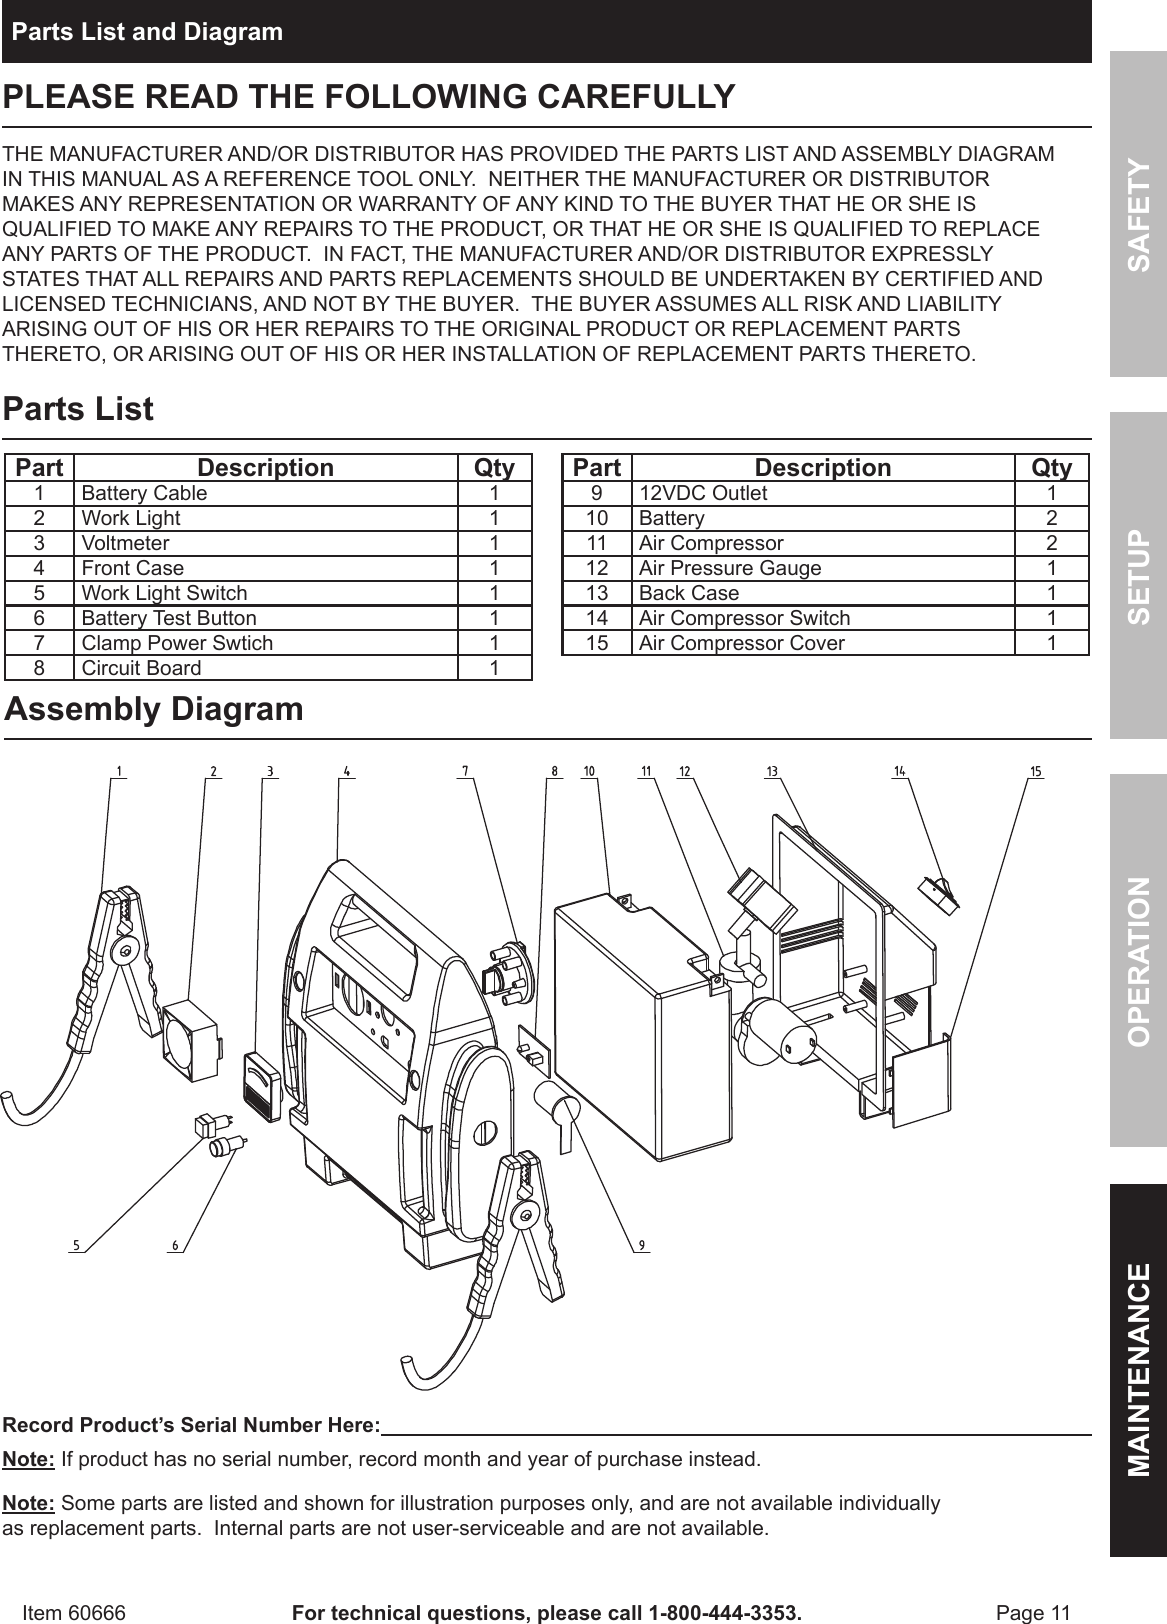 Harbor Freight 60666 Owner S Manual